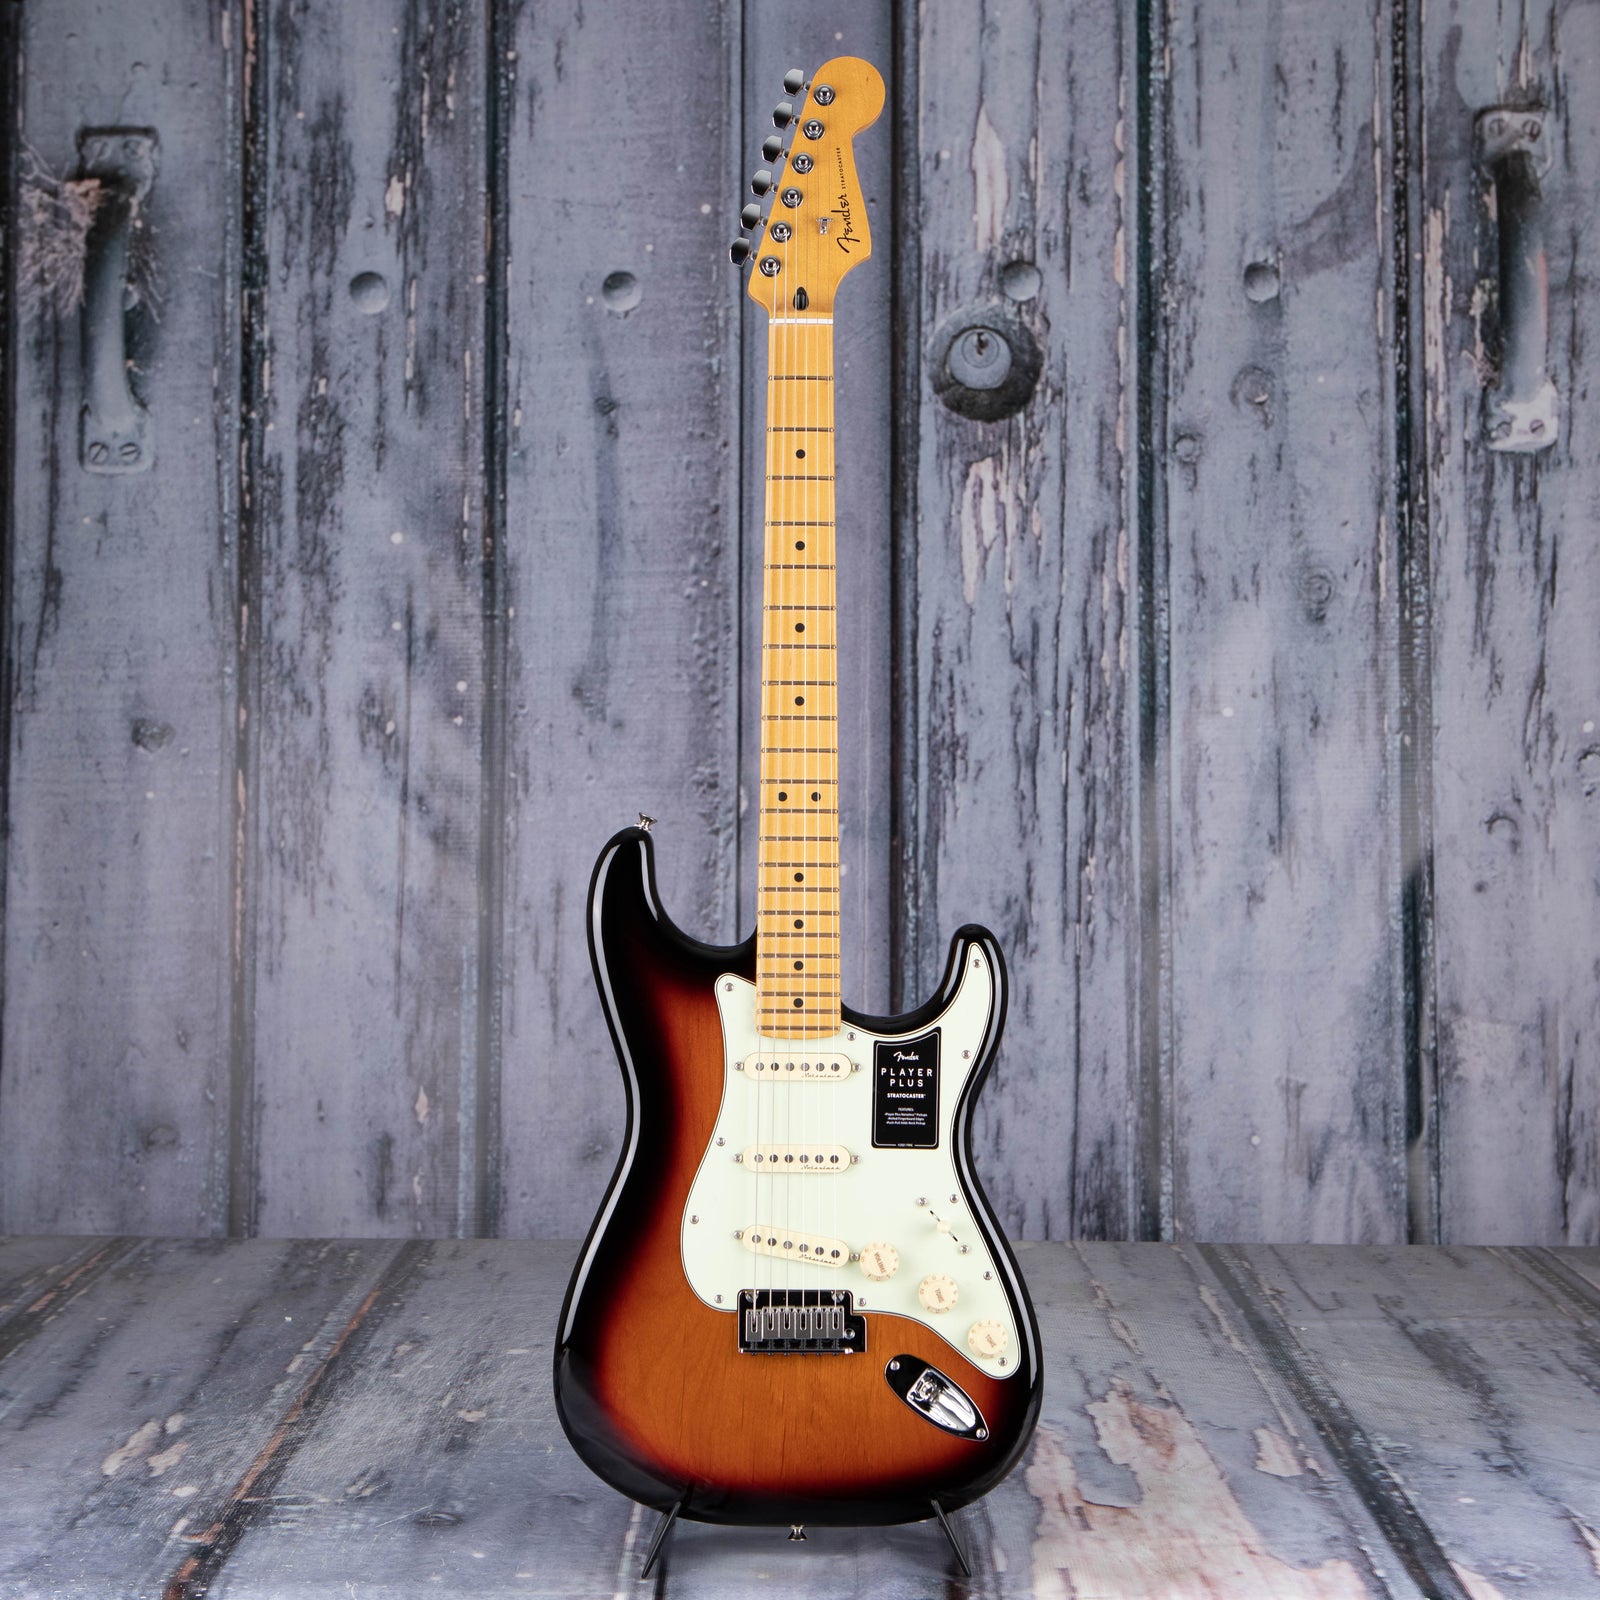 Fender Player Series Stratocaster Electric Guitar - 3 Color